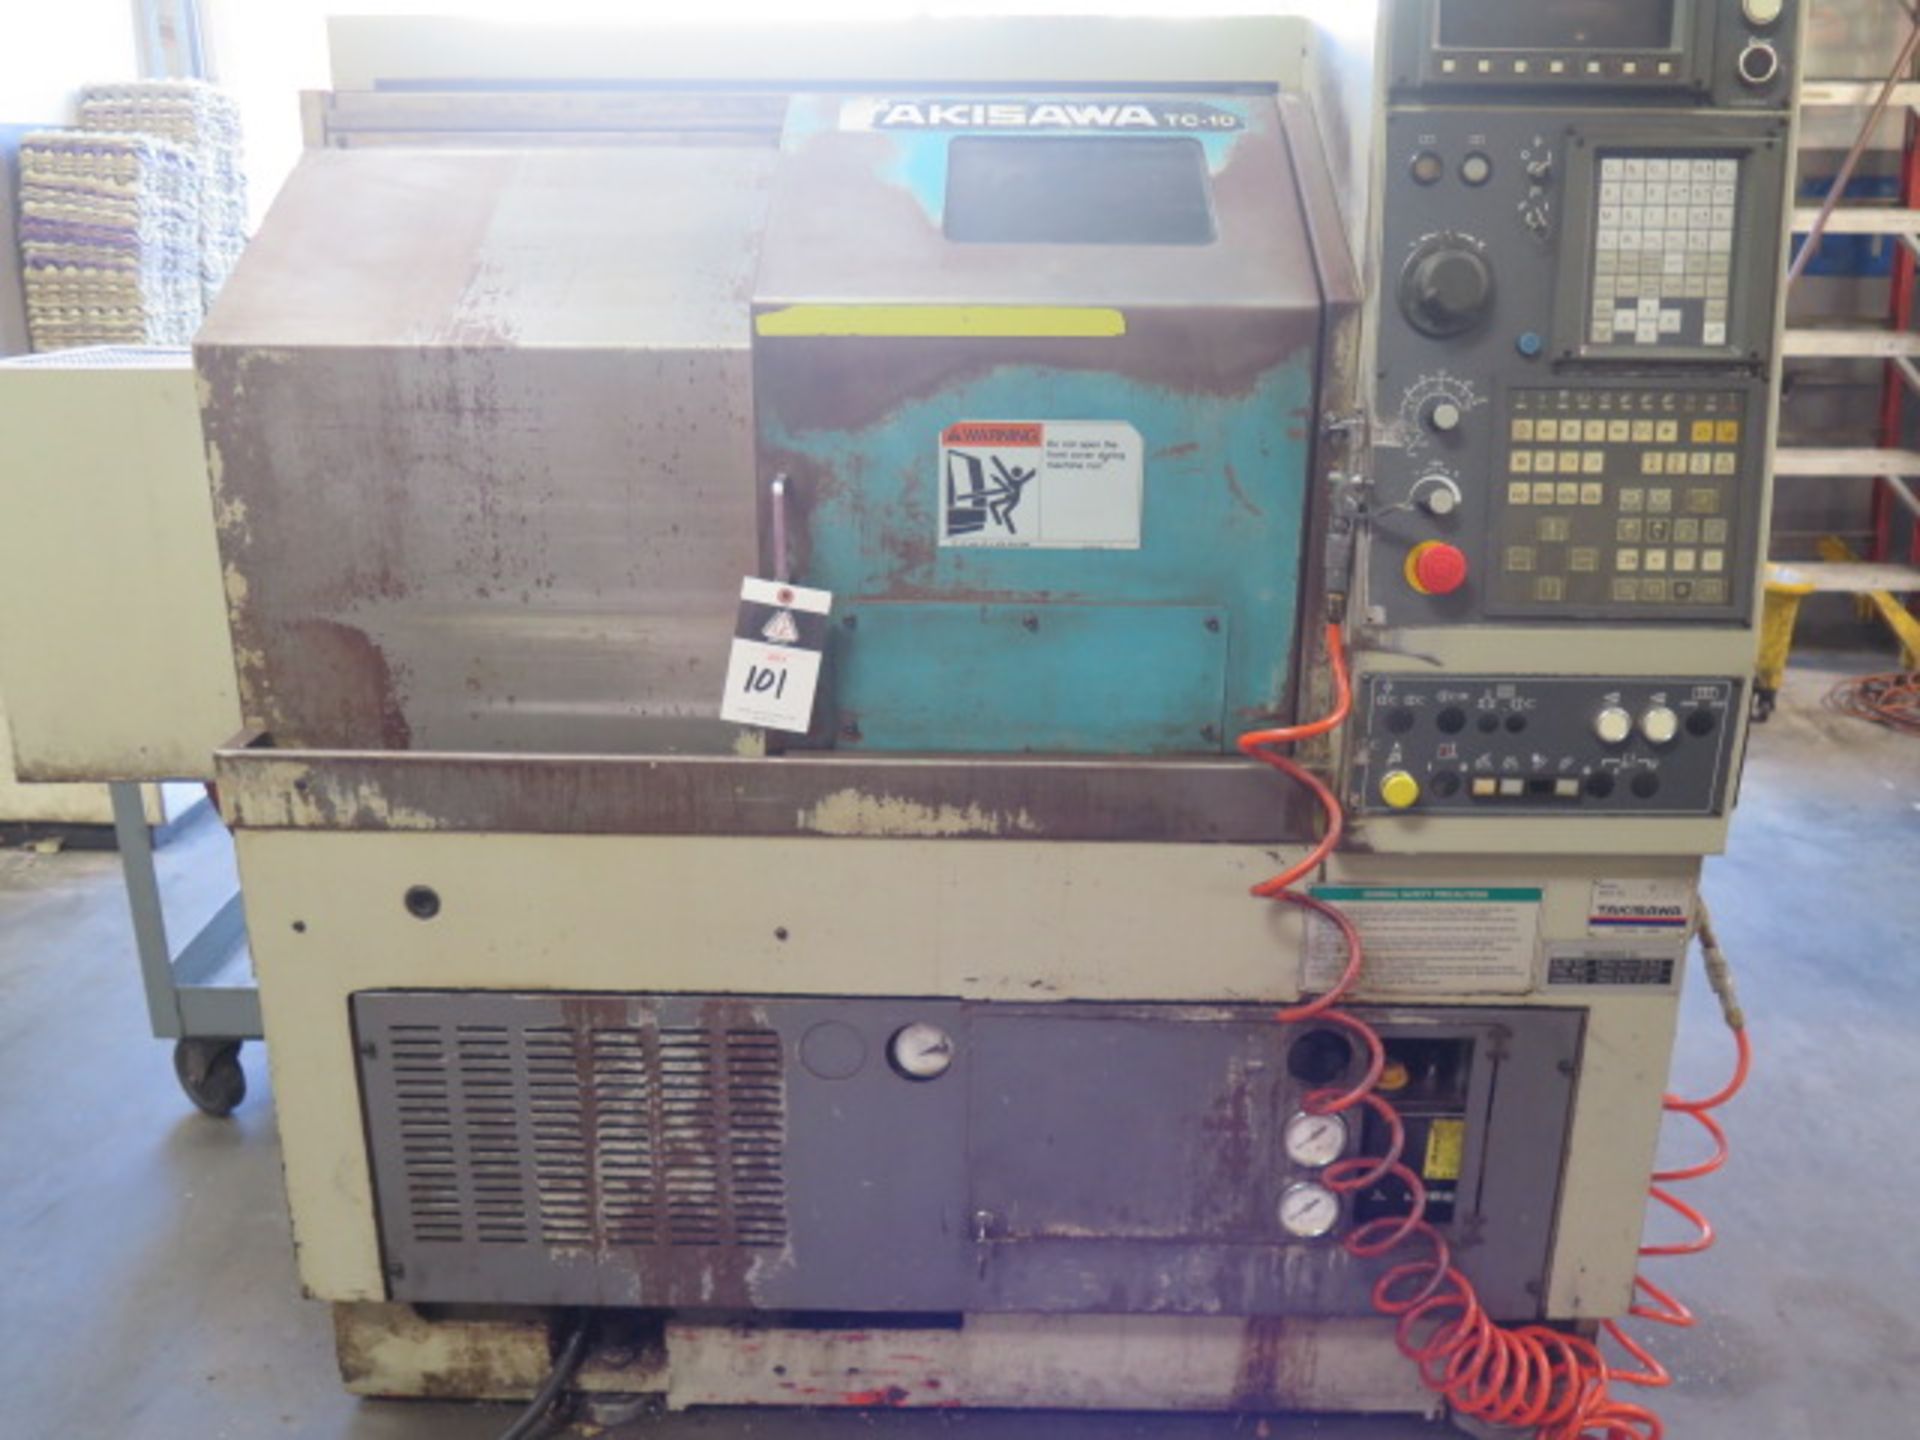 Takisawa TC-10 CNC Turning Center s/n TLRX8415 w/ Fanuc 21-T Controls, 12-Station Turret, SOLD AS IS